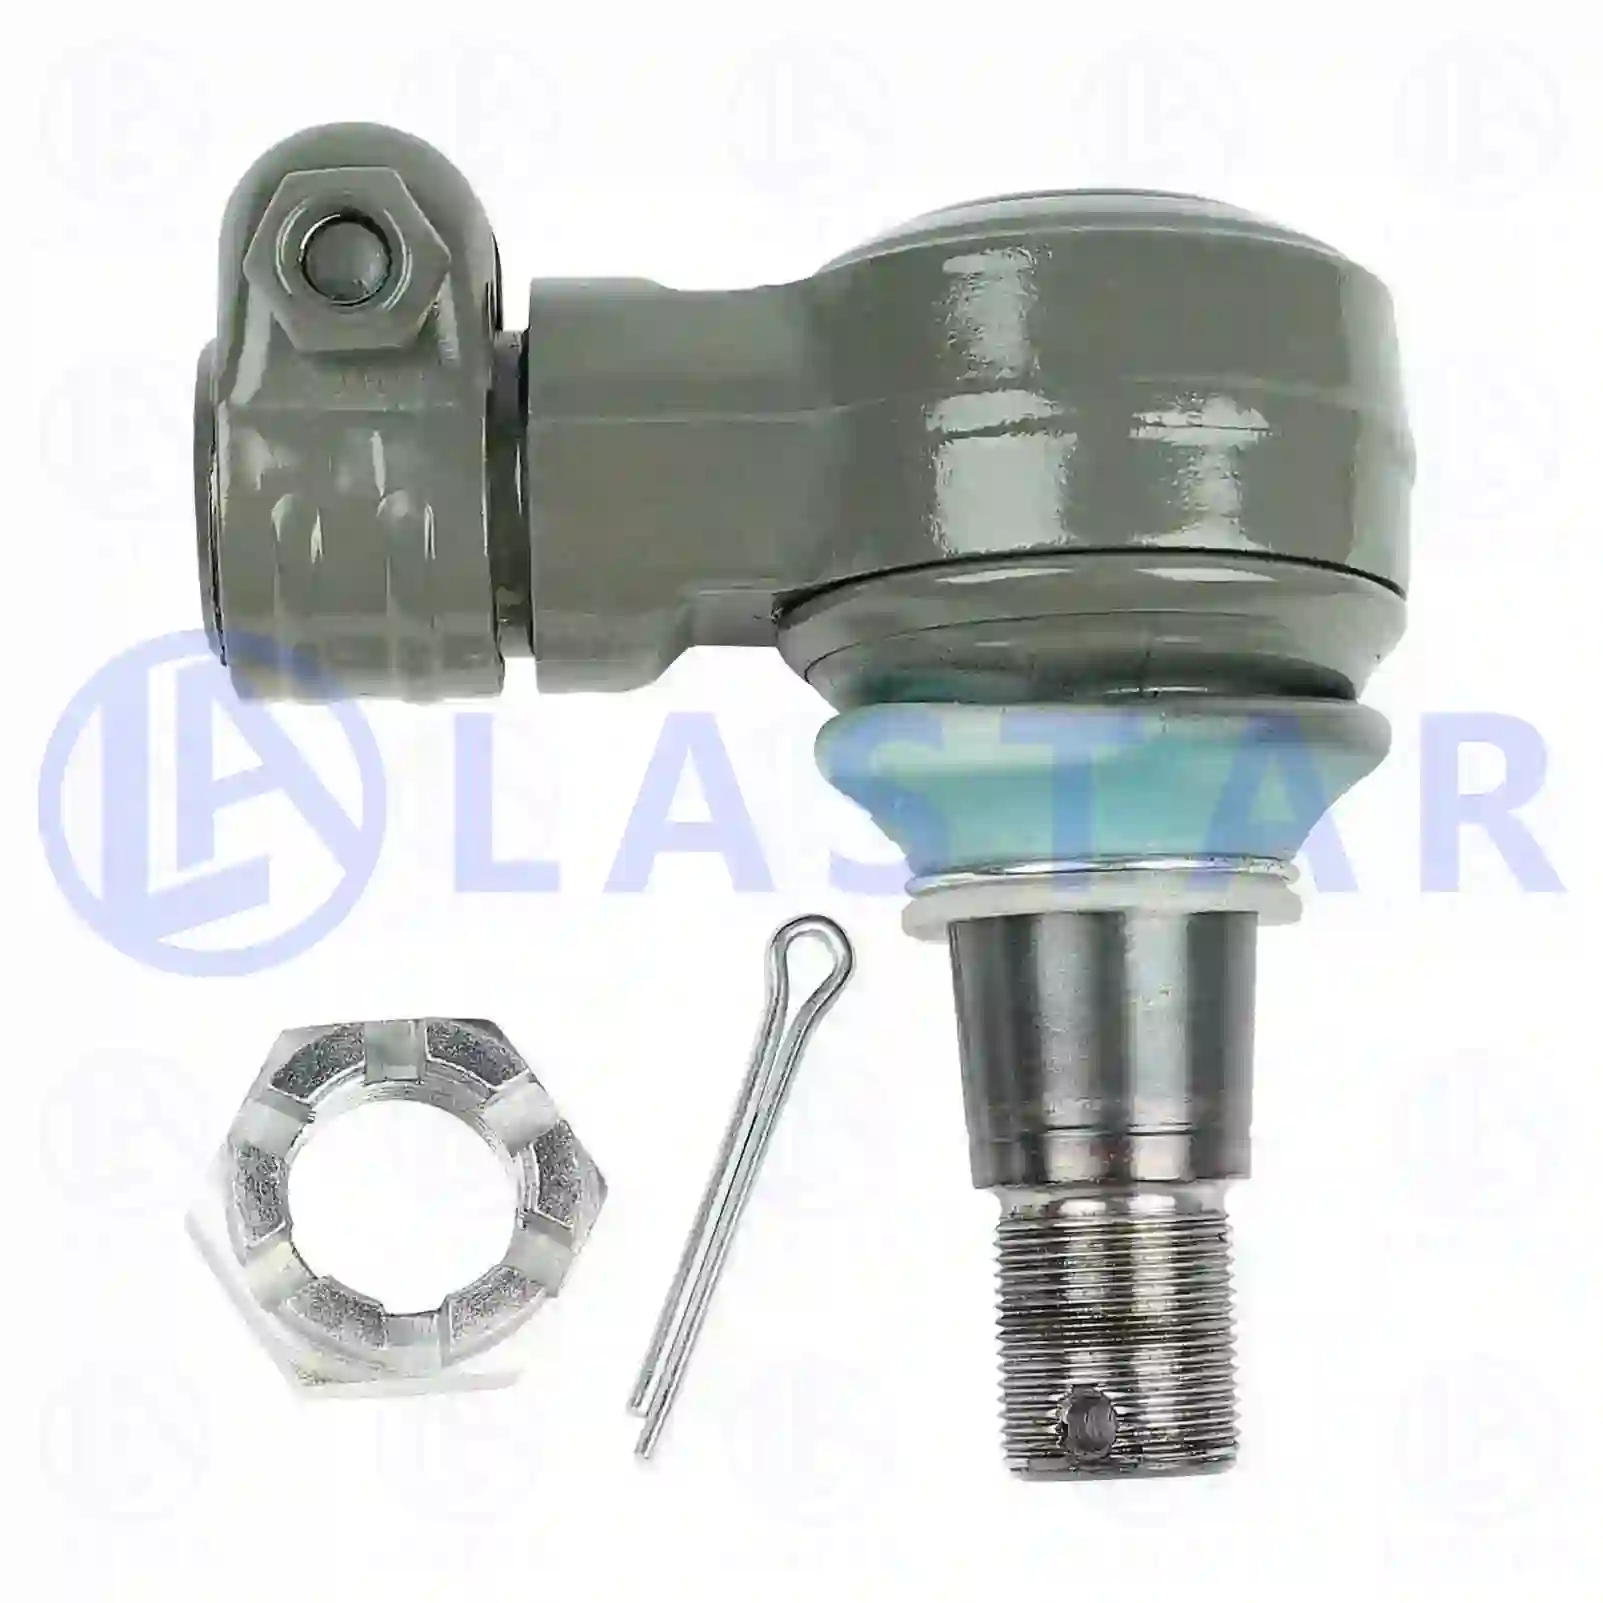 Ball joint, right hand thread, 77706000, 1607483, 1624093, , , , ||  77706000 Lastar Spare Part | Truck Spare Parts, Auotomotive Spare Parts Ball joint, right hand thread, 77706000, 1607483, 1624093, , , , ||  77706000 Lastar Spare Part | Truck Spare Parts, Auotomotive Spare Parts